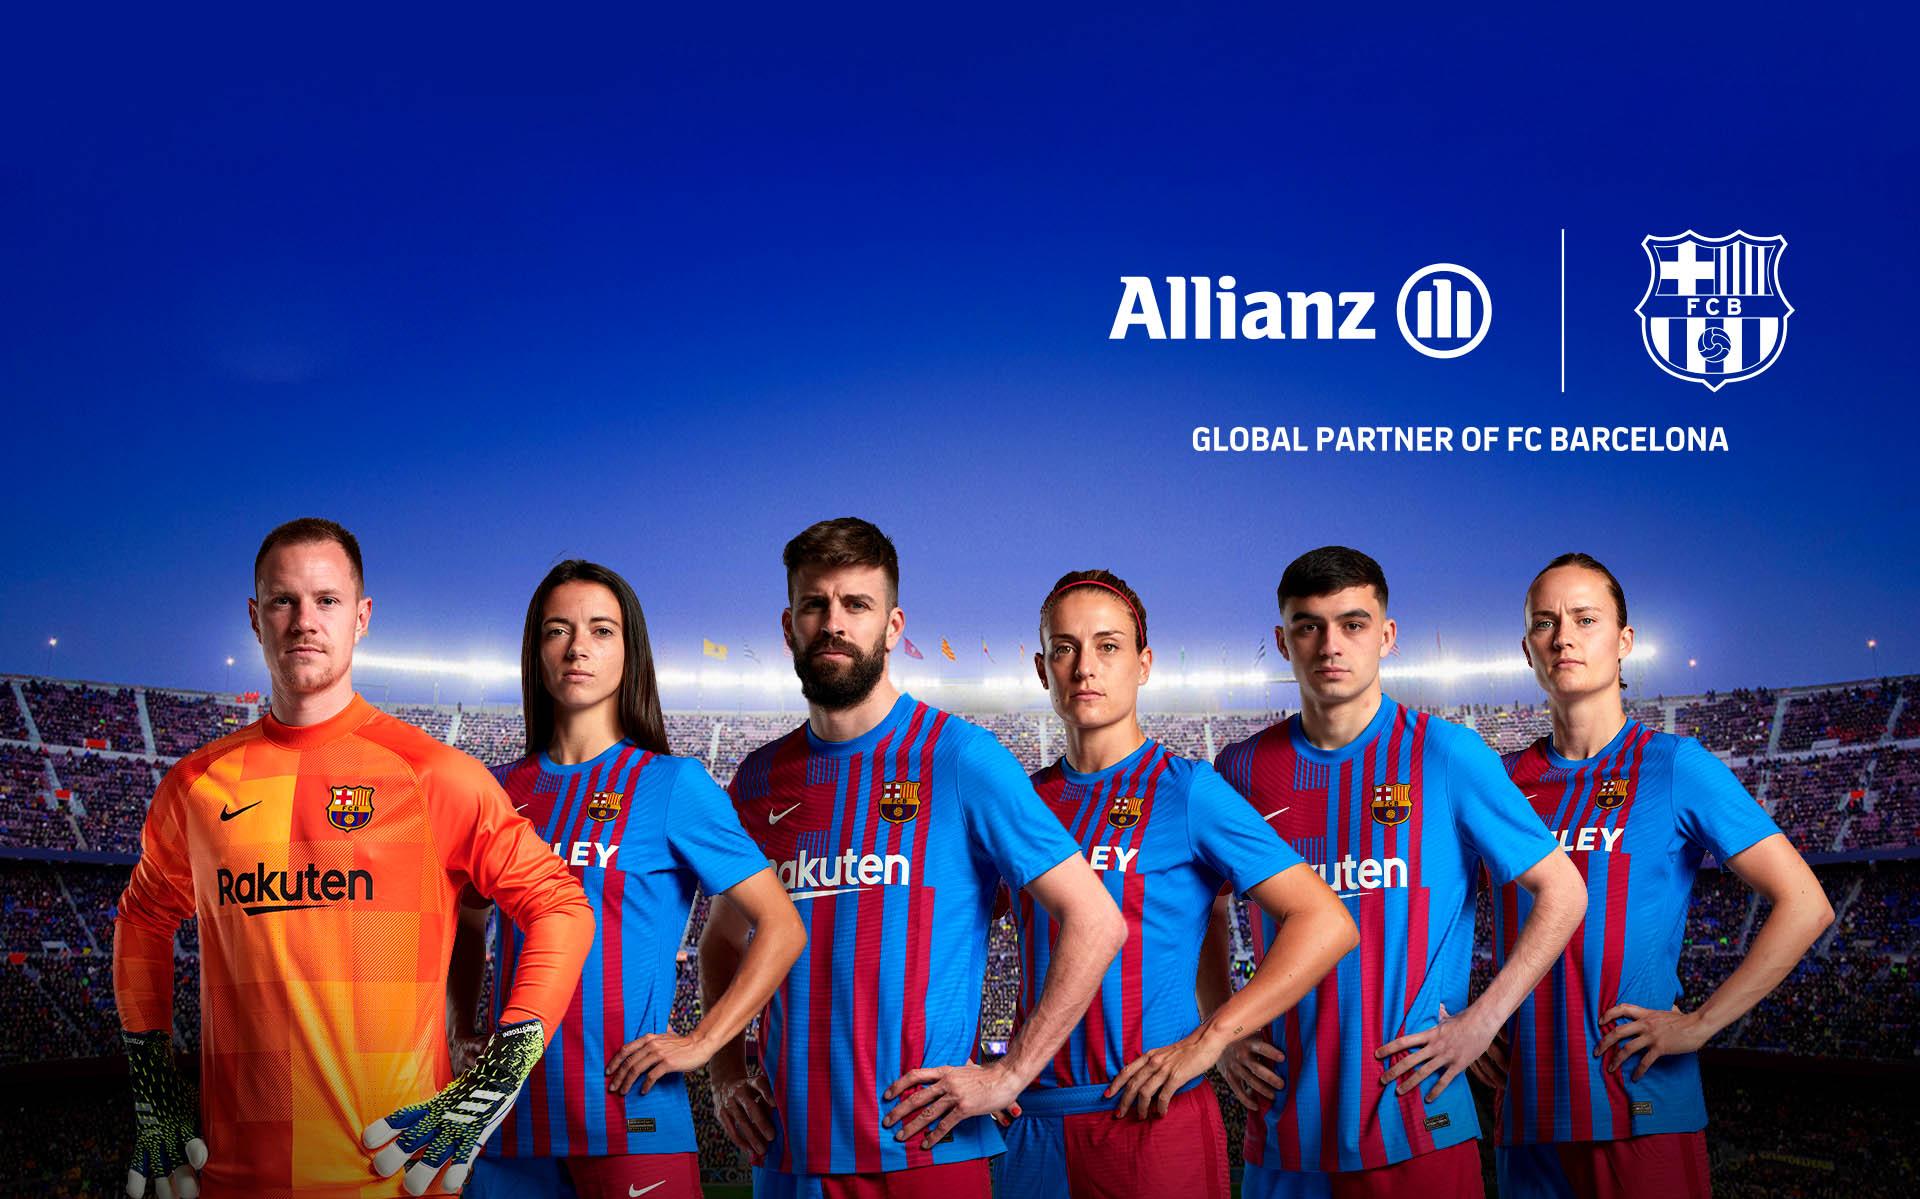 Allianz becomes global partner and extends agreement with Club